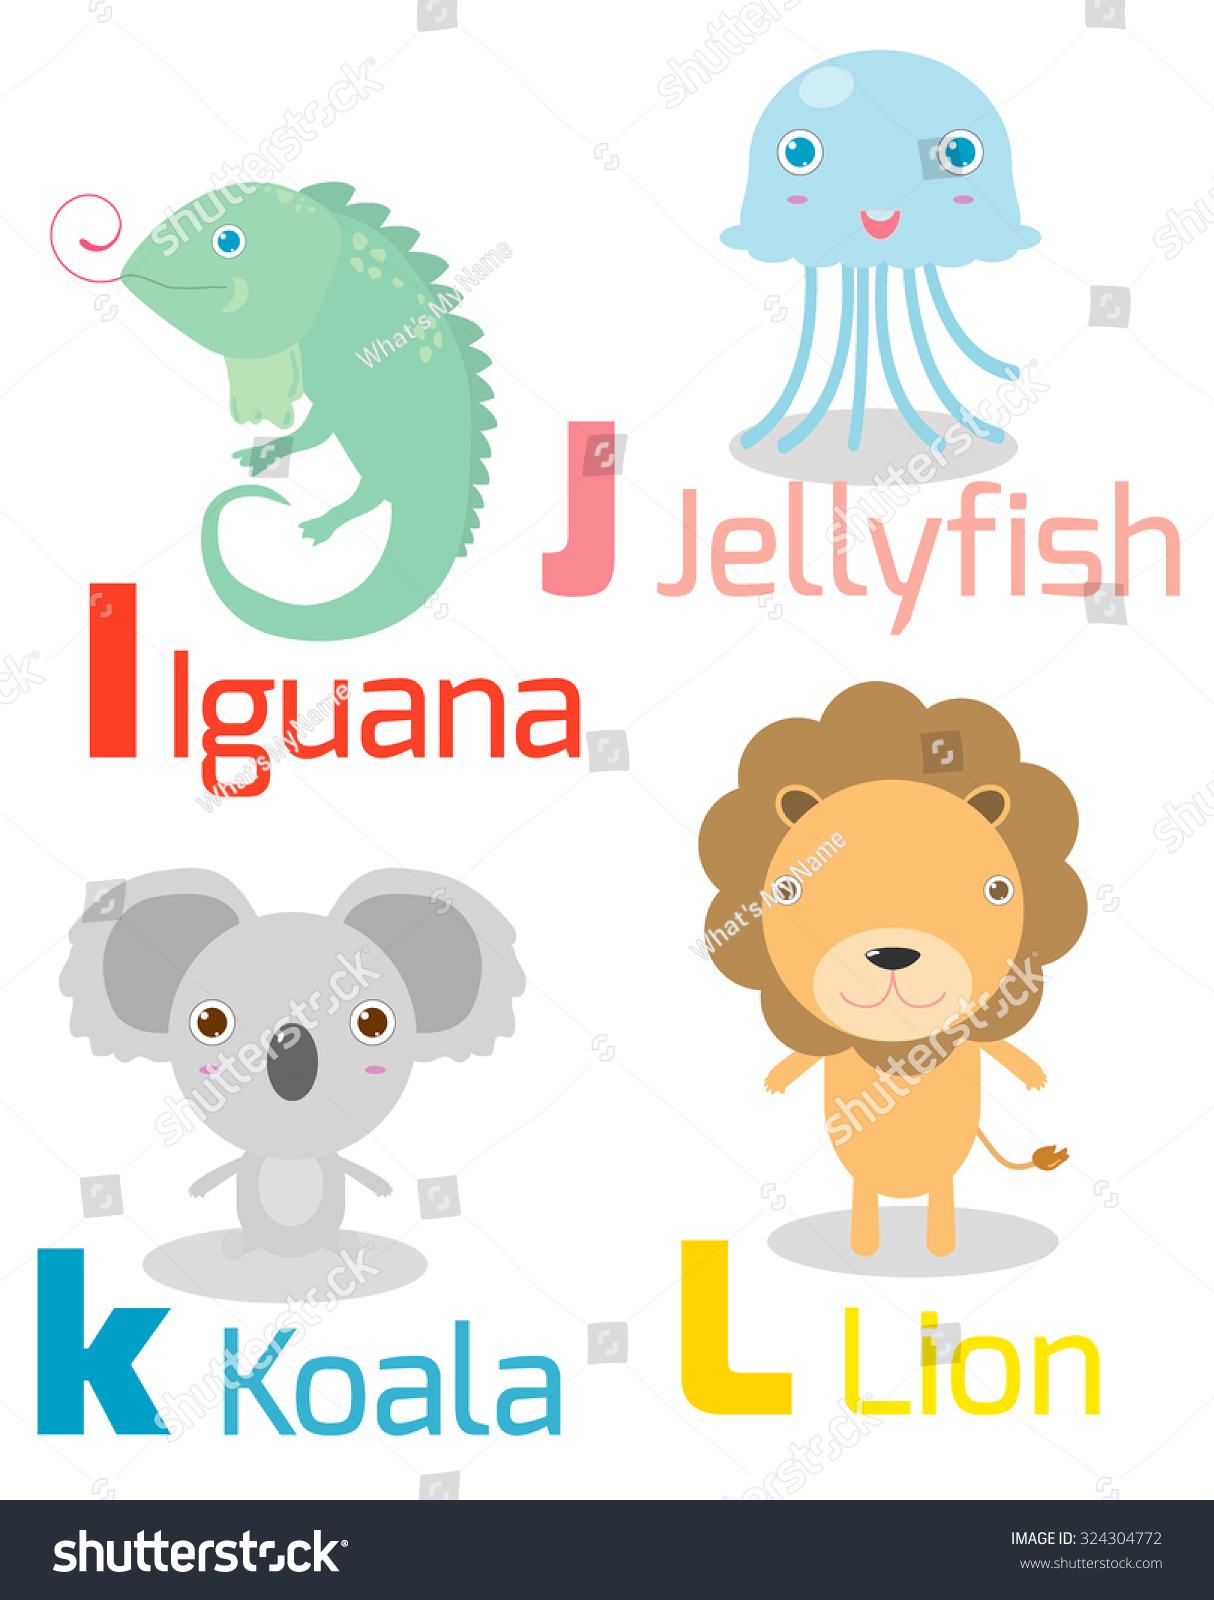 Made by Teachers: Animals Name Starting With K